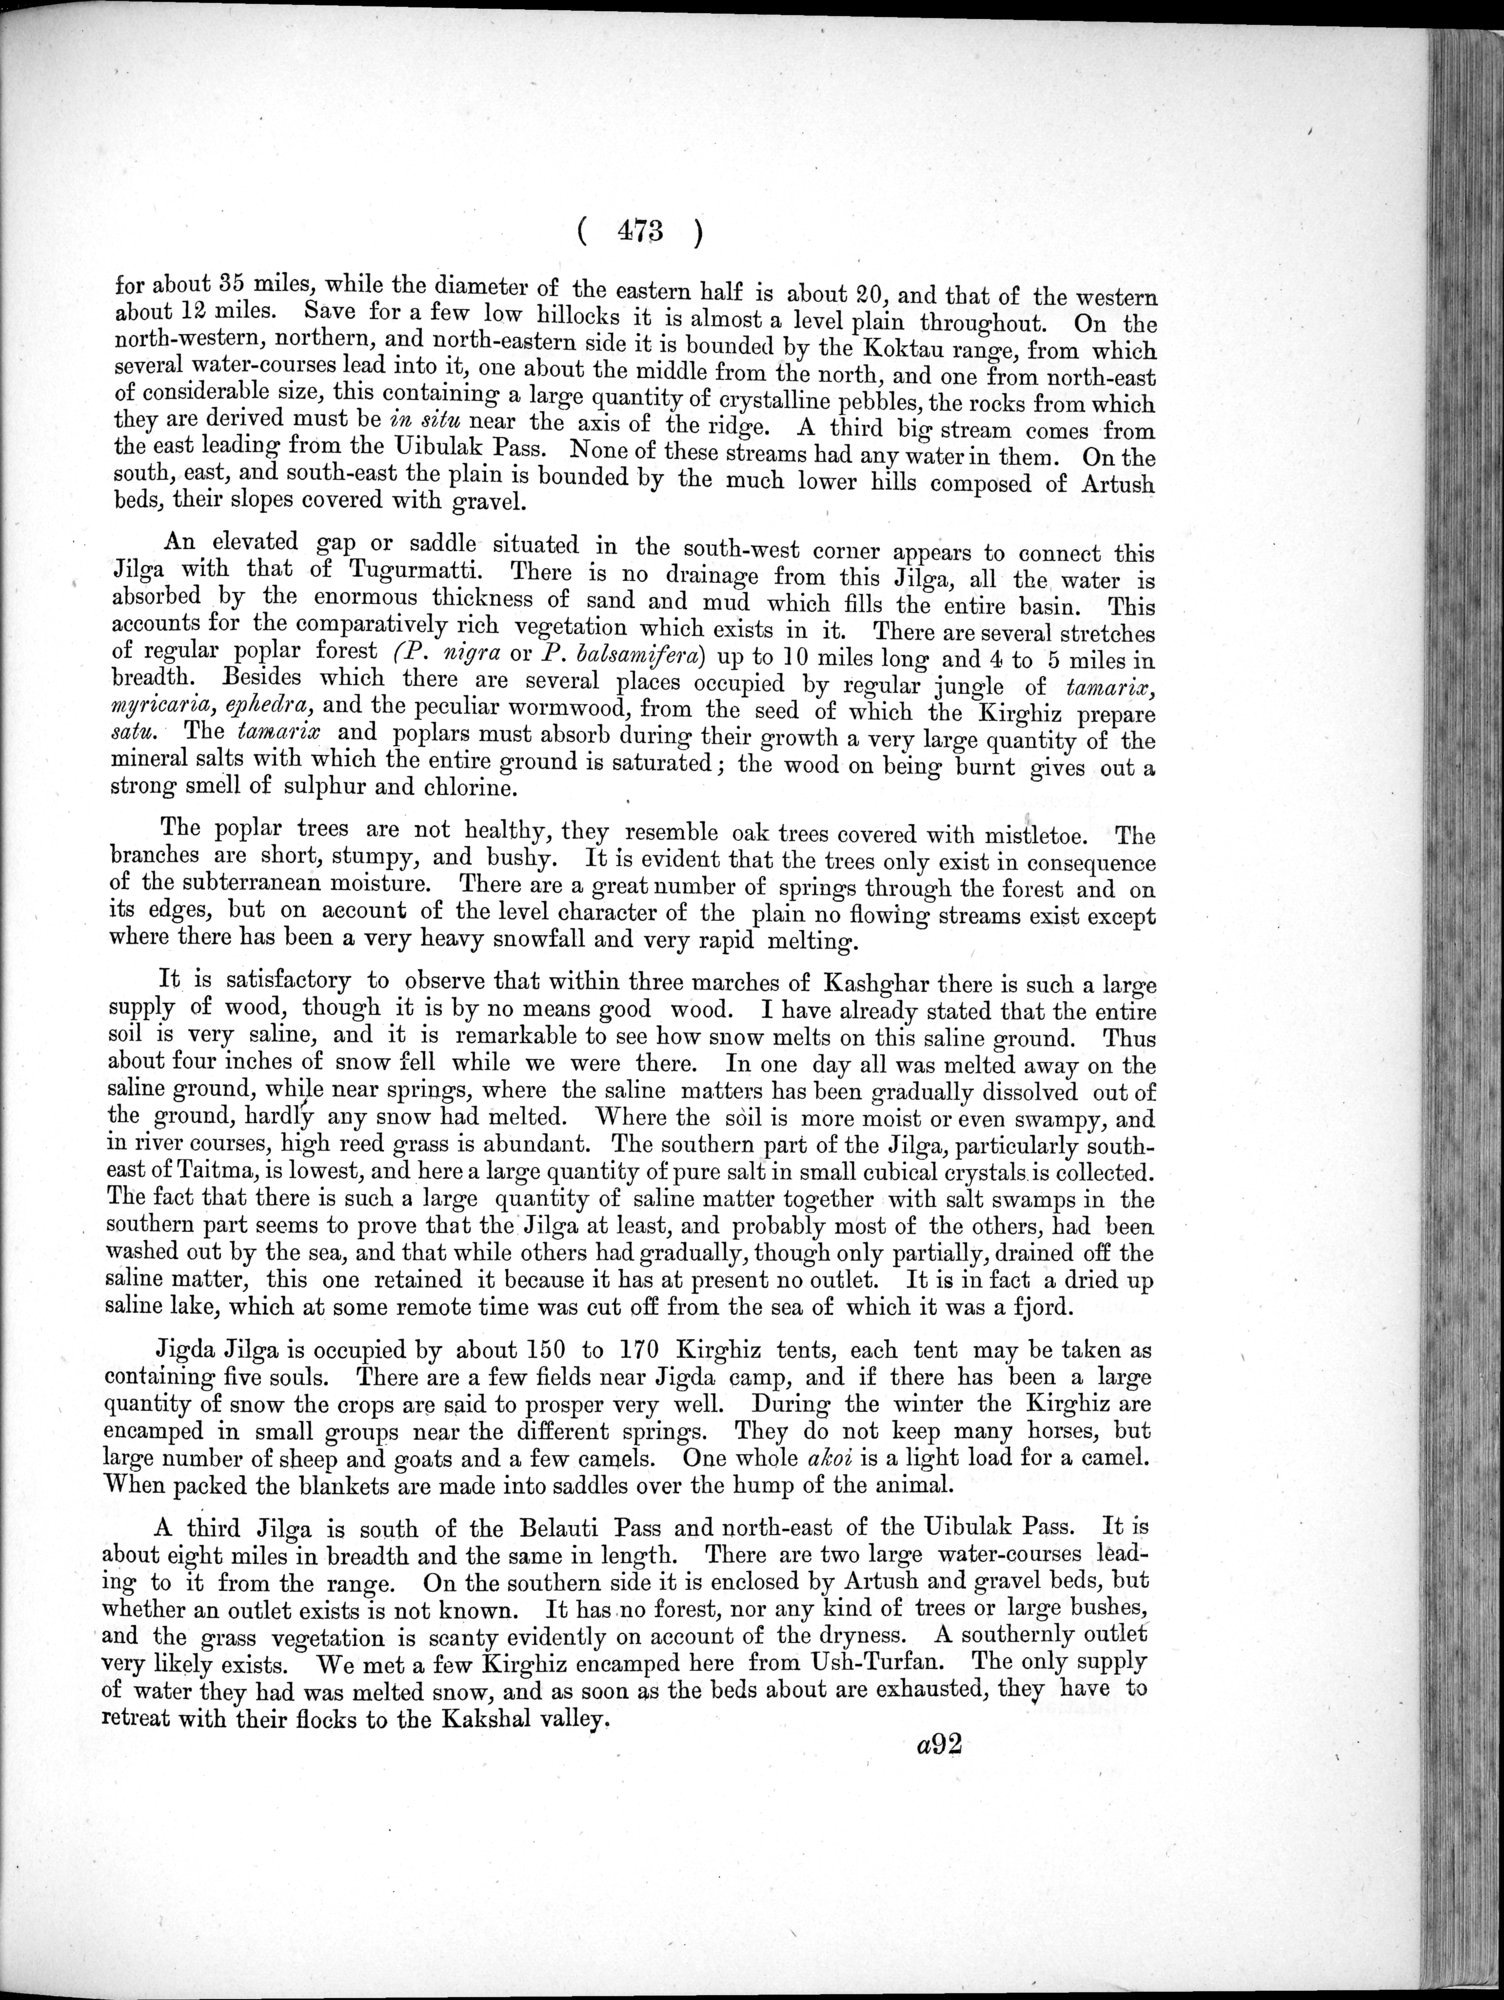 Report of a Mission to Yarkund in 1873 : vol.1 / Page 607 (Grayscale High Resolution Image)